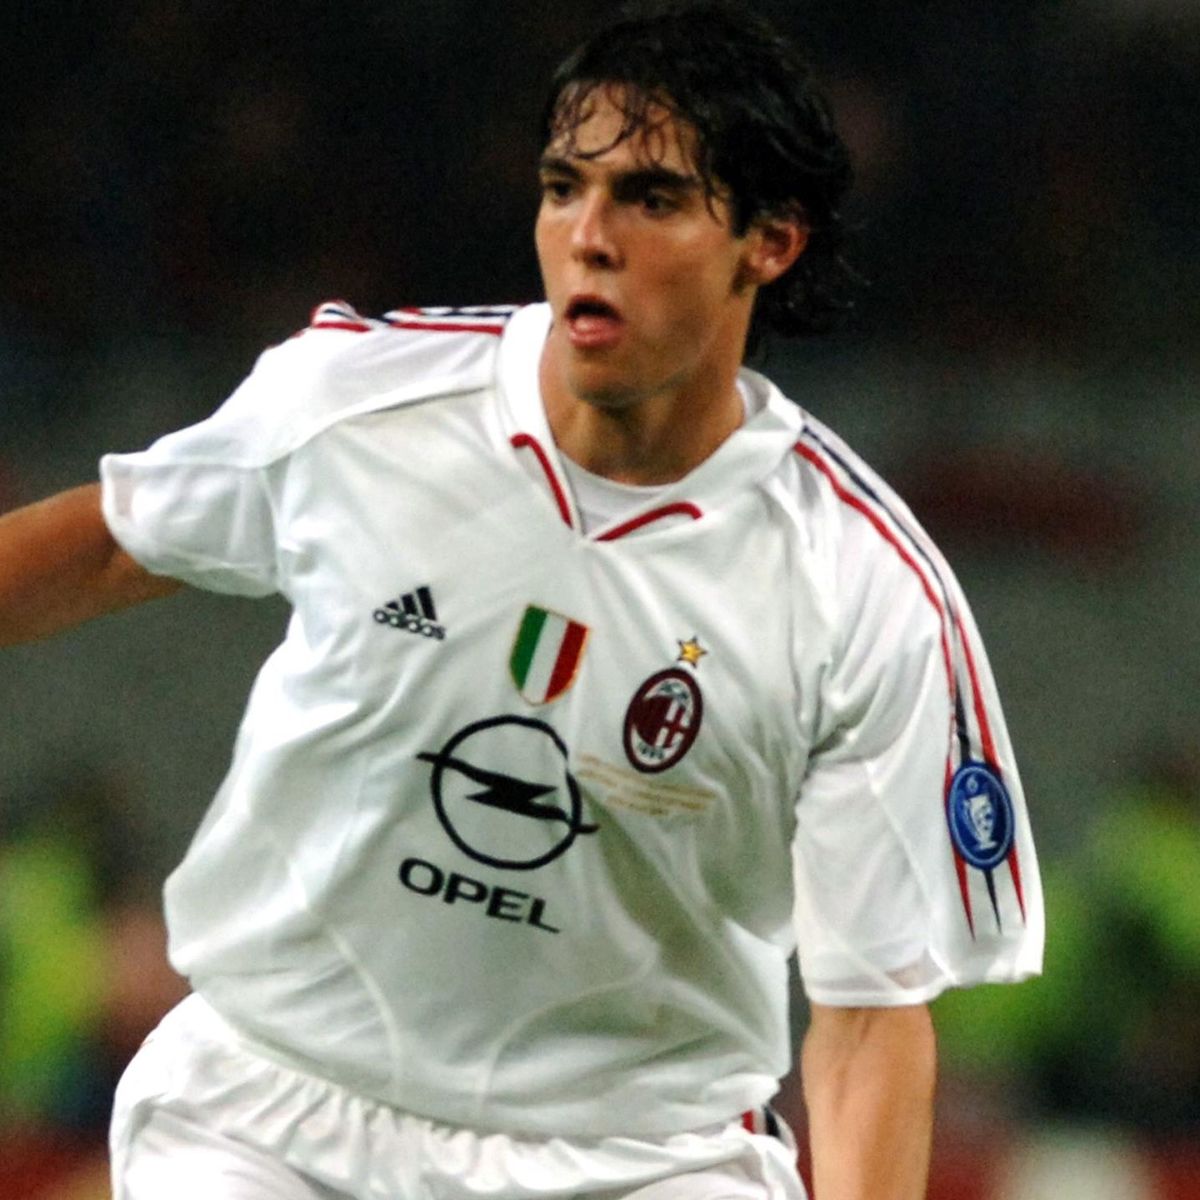 Football news - Remembering Kaka's assist for Crespo in AC Milan's 2005 loss to Liverpool - Eurosport